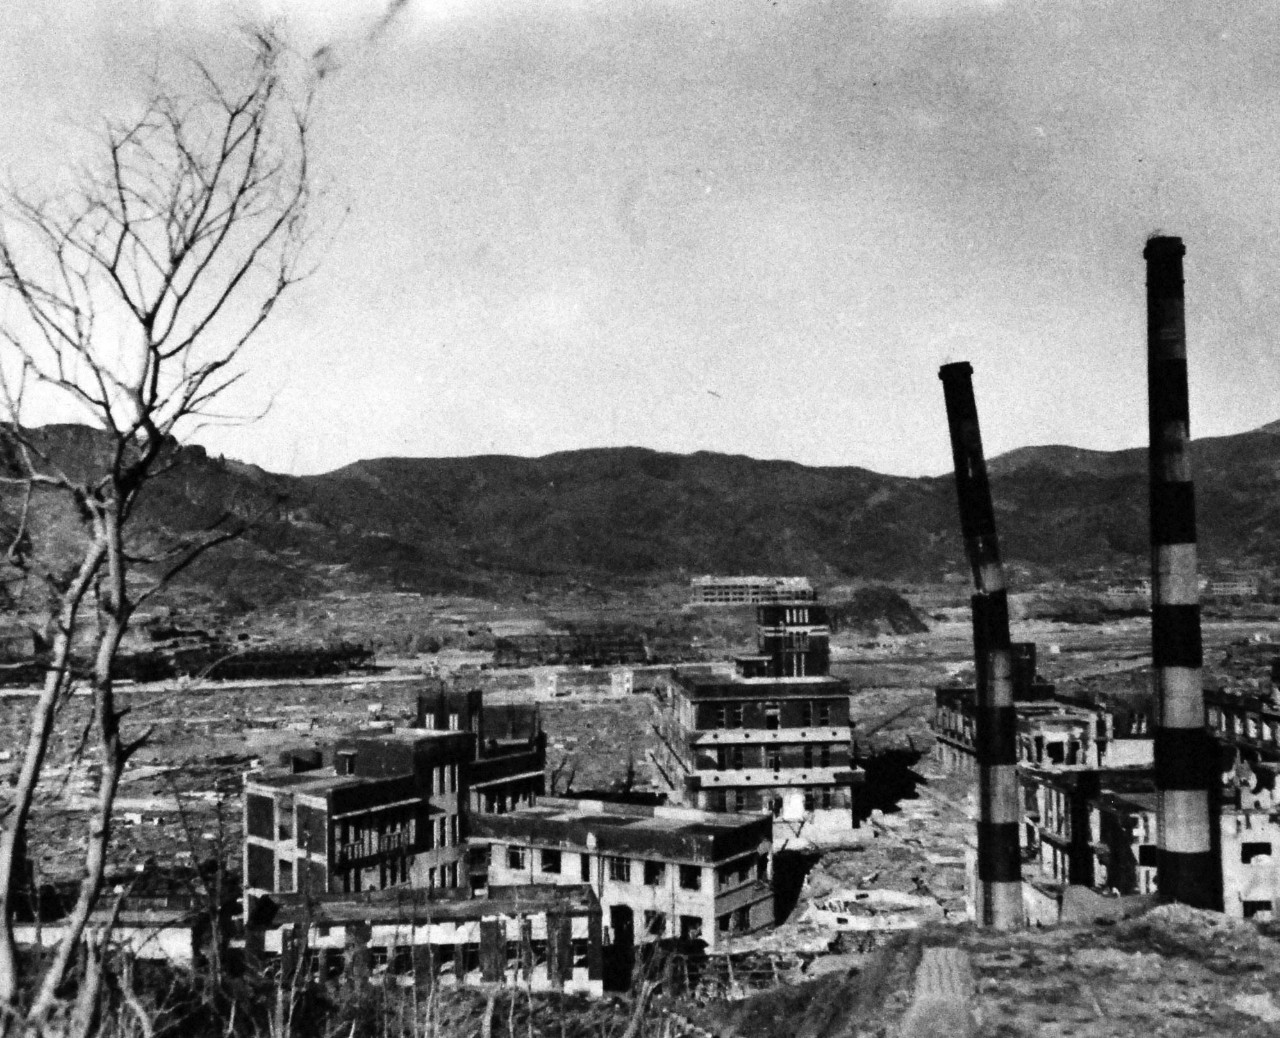 127-GW-1643-147932:   Nagasaki, Japan, 1945.     Taken outside of Medicine College and hospital to show size of building.  Photographed at Nagasaki, Japan, October 25, 1945.        Official U.S. Marine Corps Photograph, now in the collections of the National Archives.  (2016/10/25).